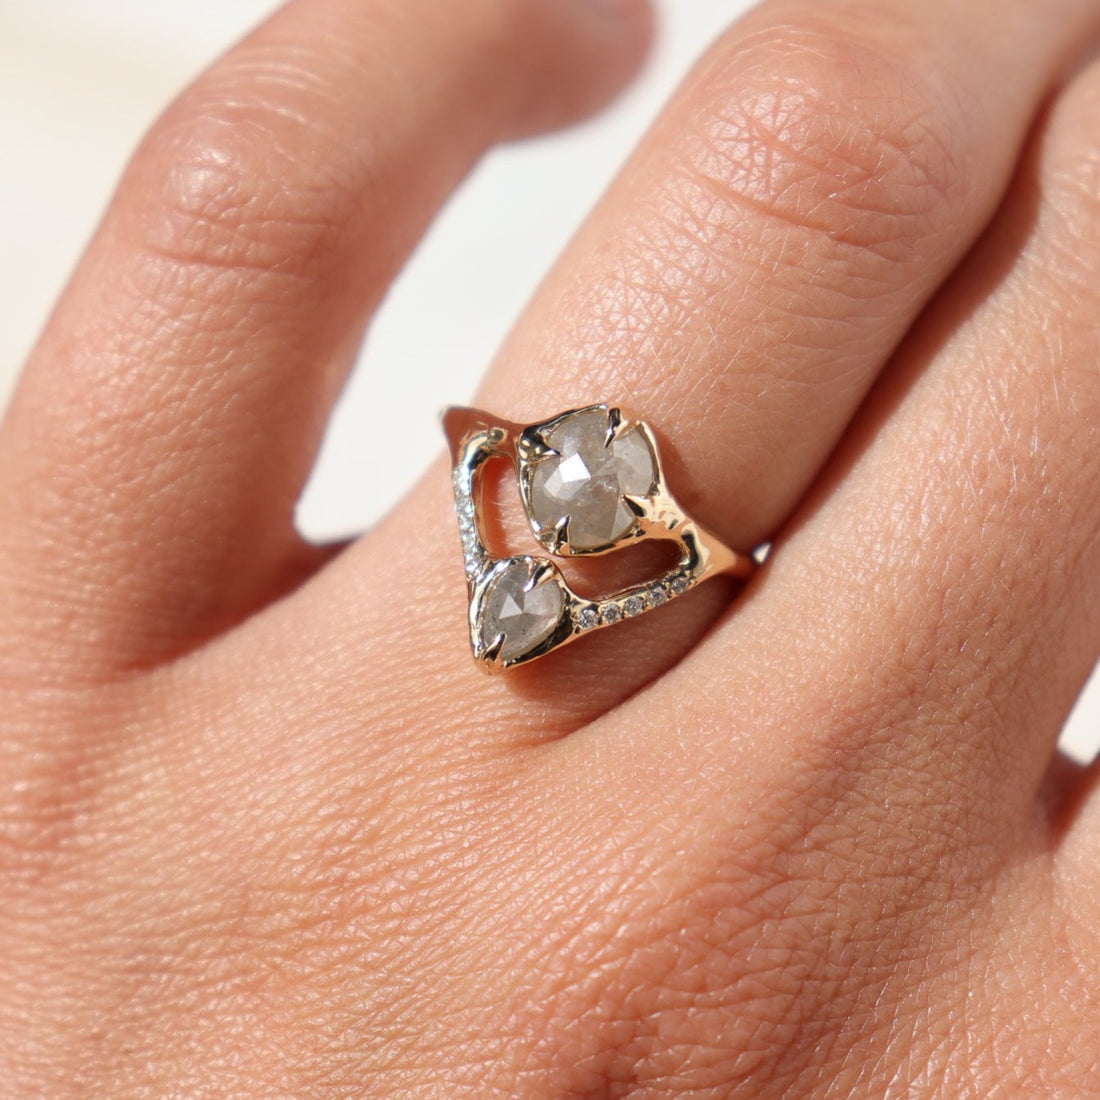 gray salt and pepper diamond ring being worn on the ring finger